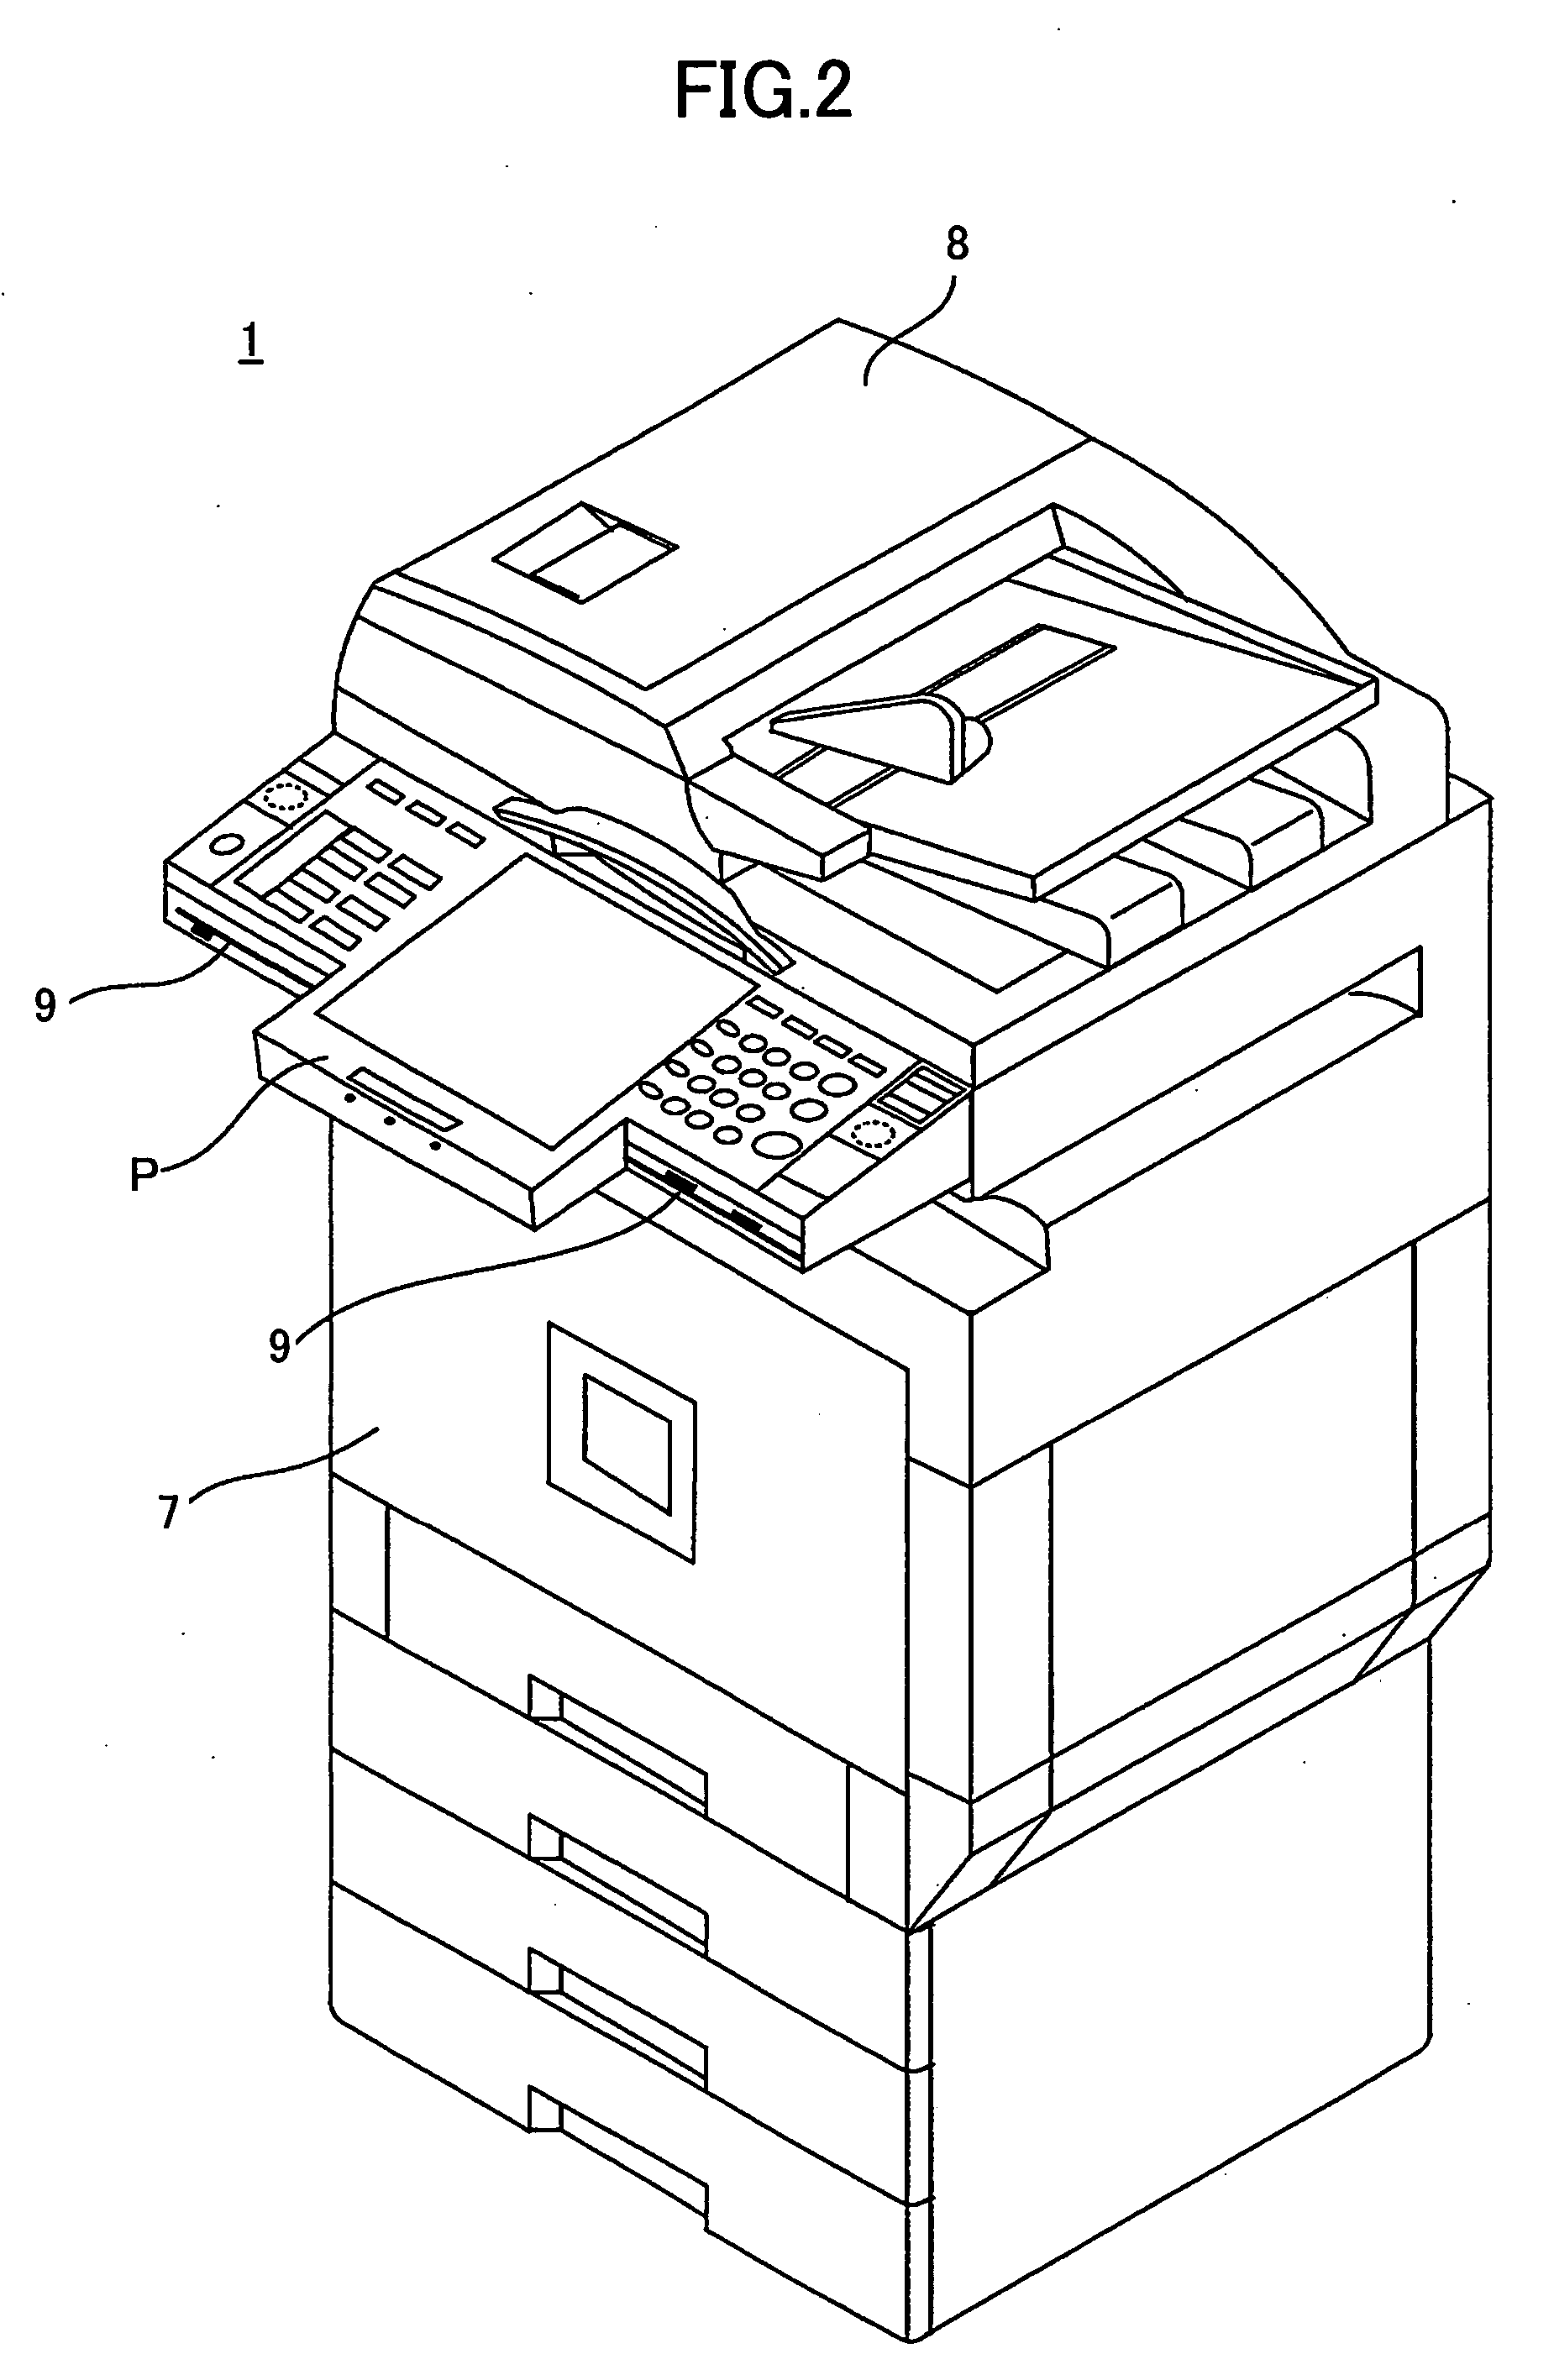 Pin point searching map document input and output device and pin point searching map document input and output method of the device